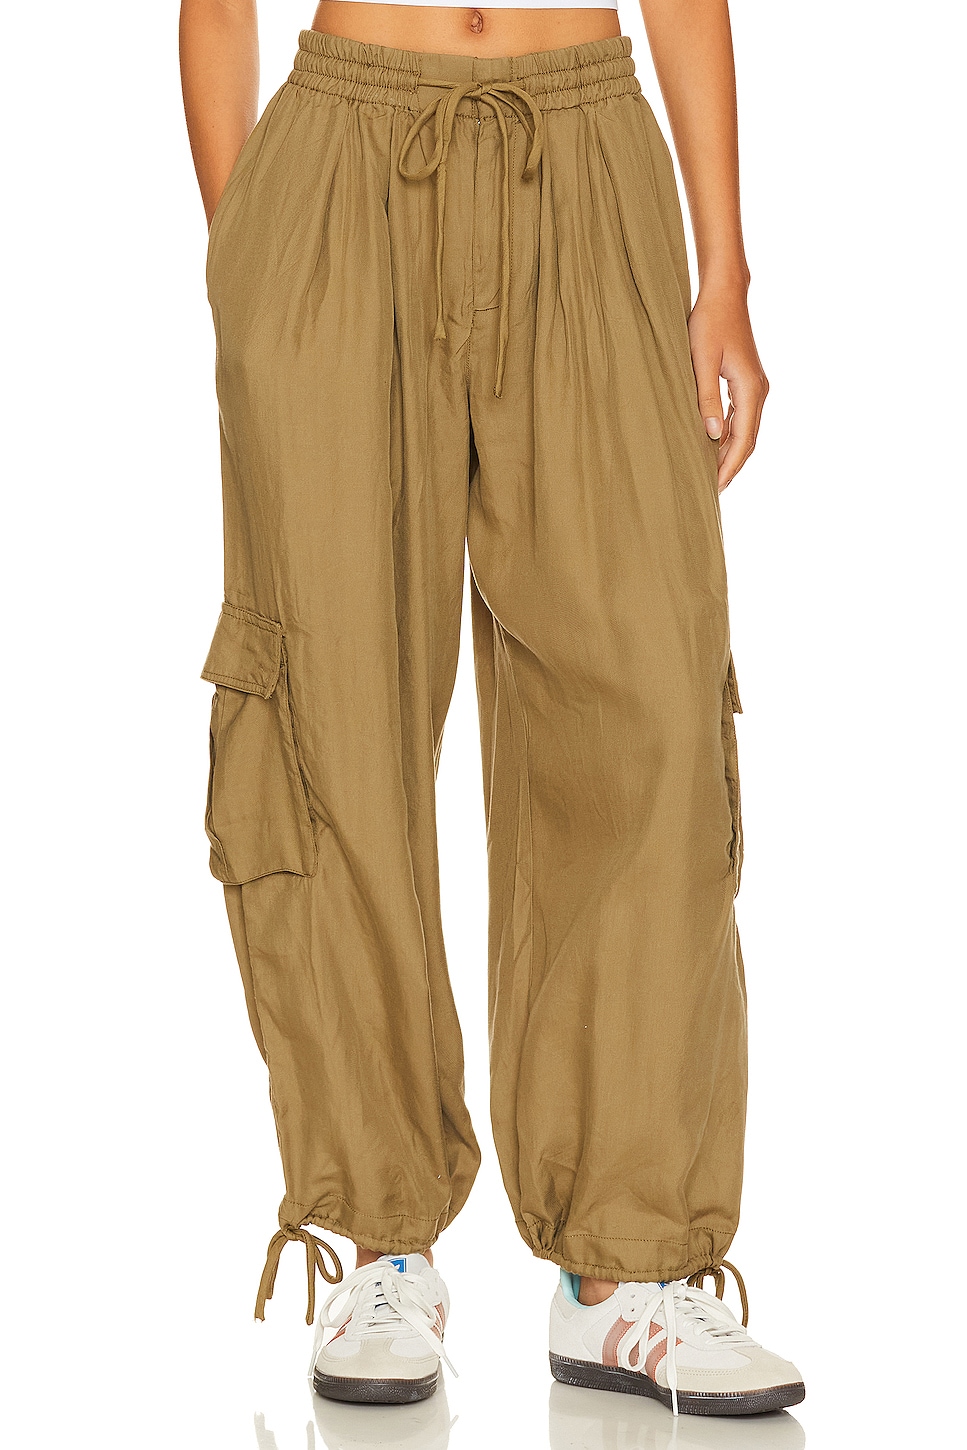 Free People Palash Cargo Pant in Dried Herb